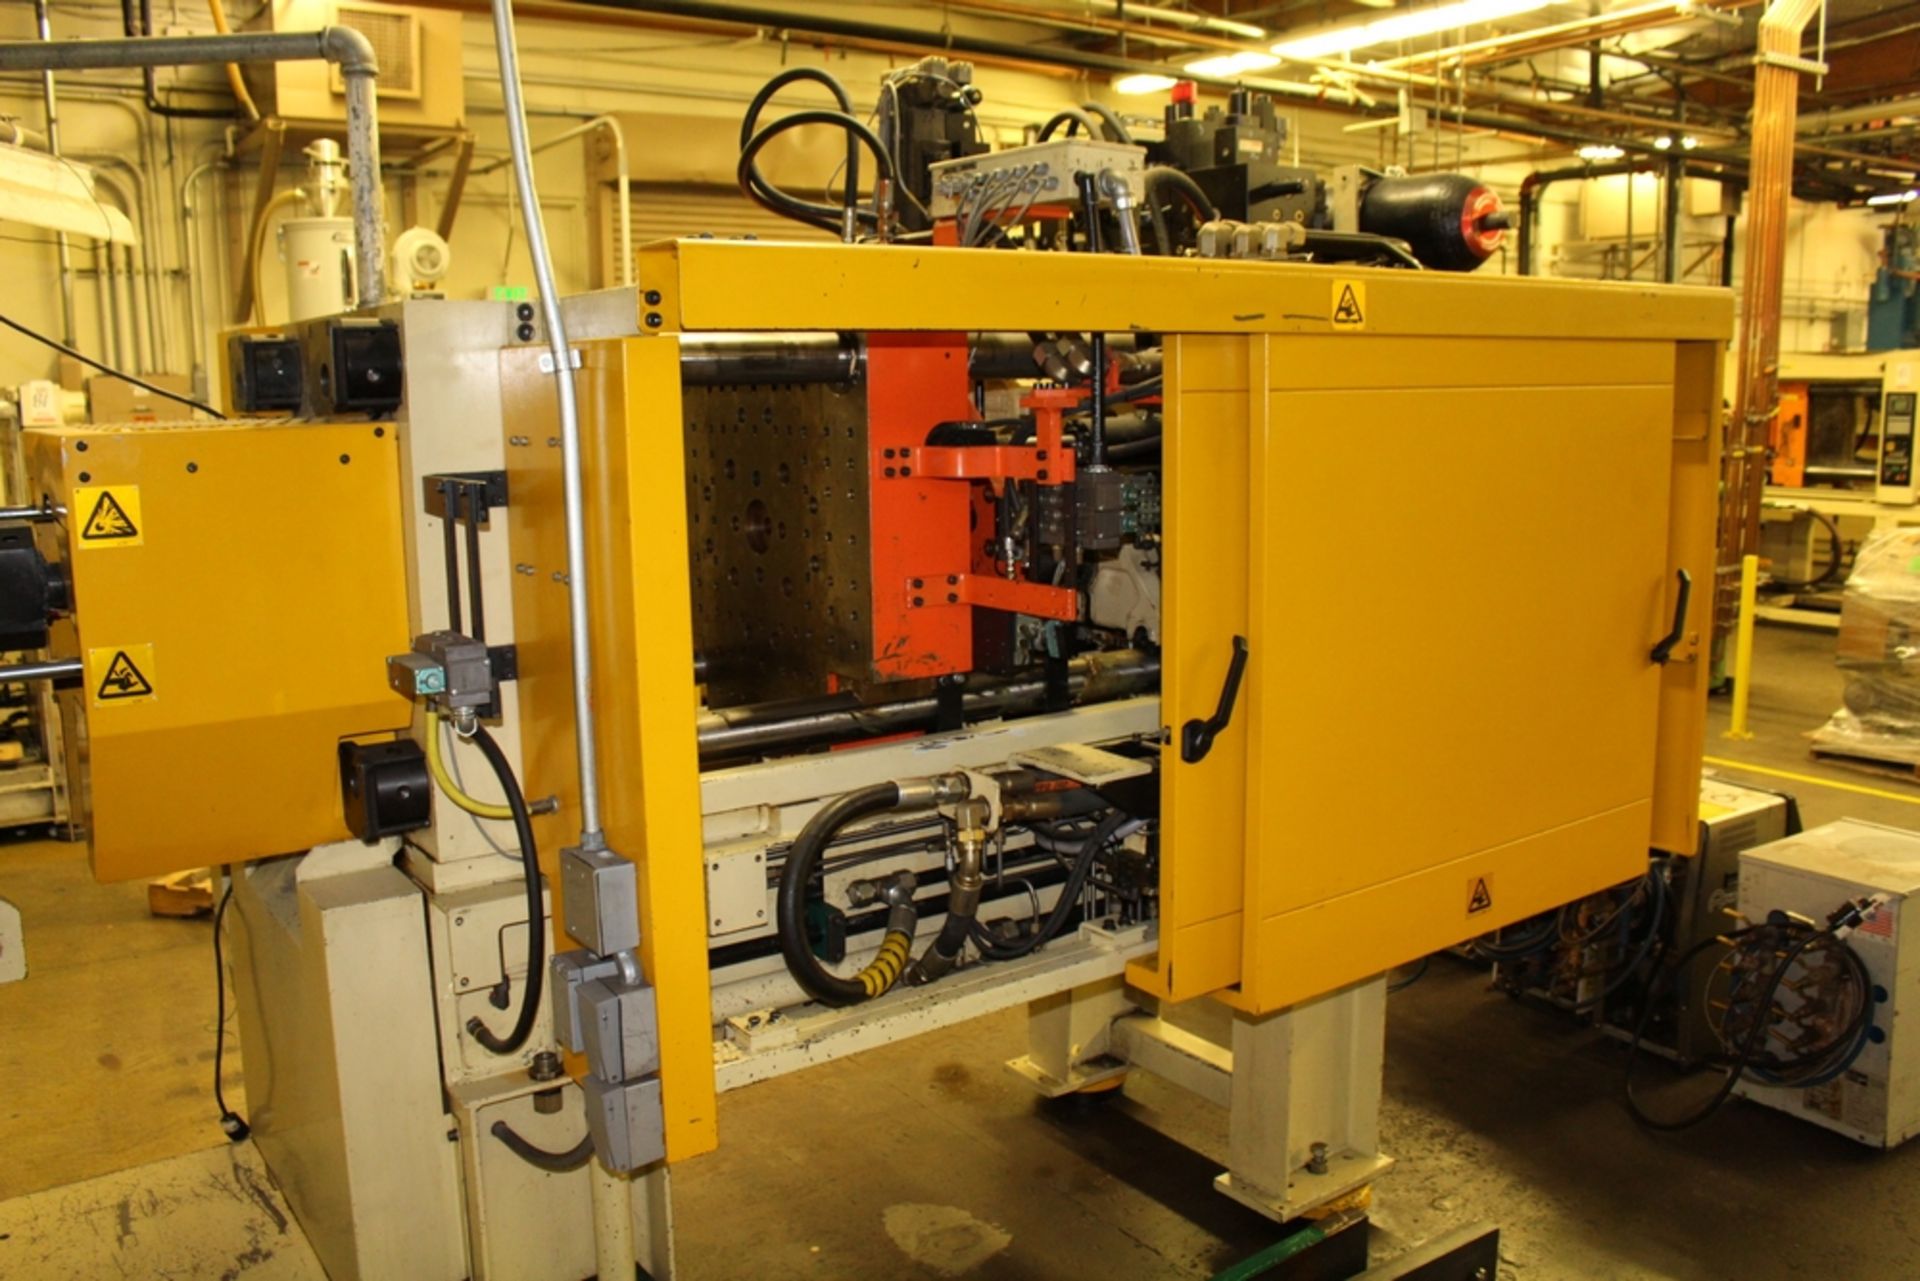 1995 HUSKY 225-TON INJECTION MOLDING MACHINE, MODEL CX160 RS42/42, S/N 11831, 31.5" X 31.5" PLATENS, - Image 8 of 8